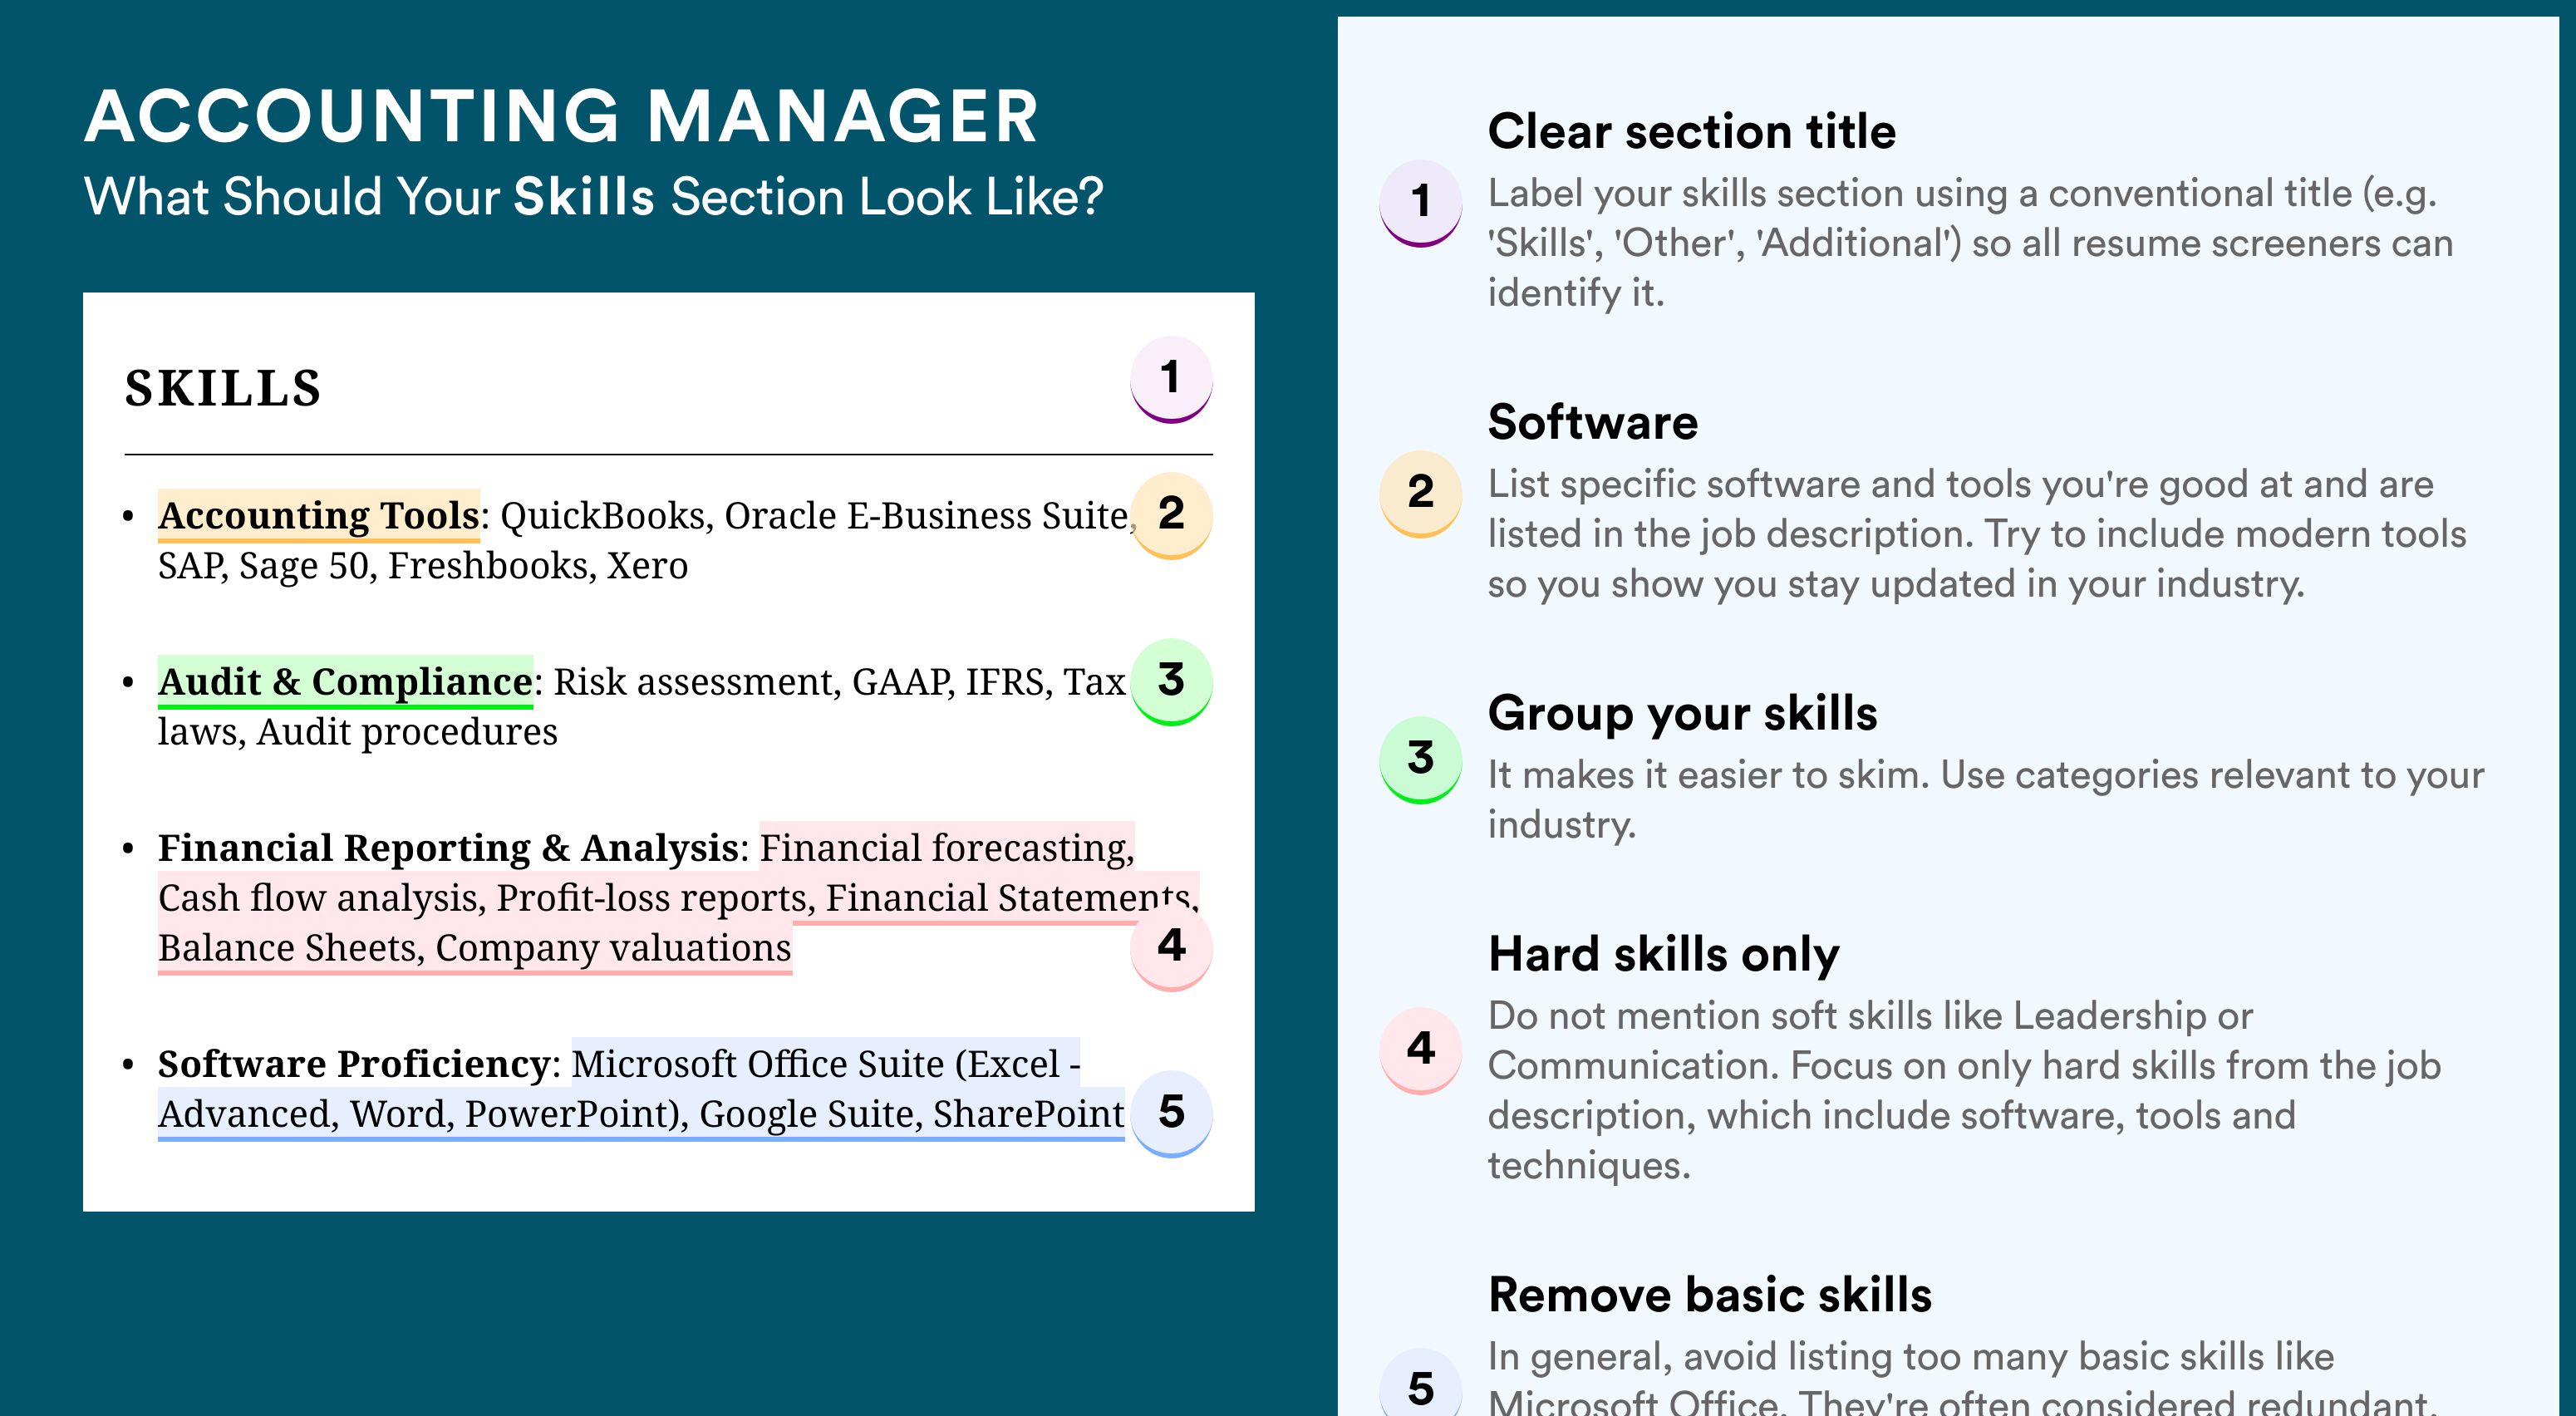 How To Write Your Skills Section - Accounting Manager Roles